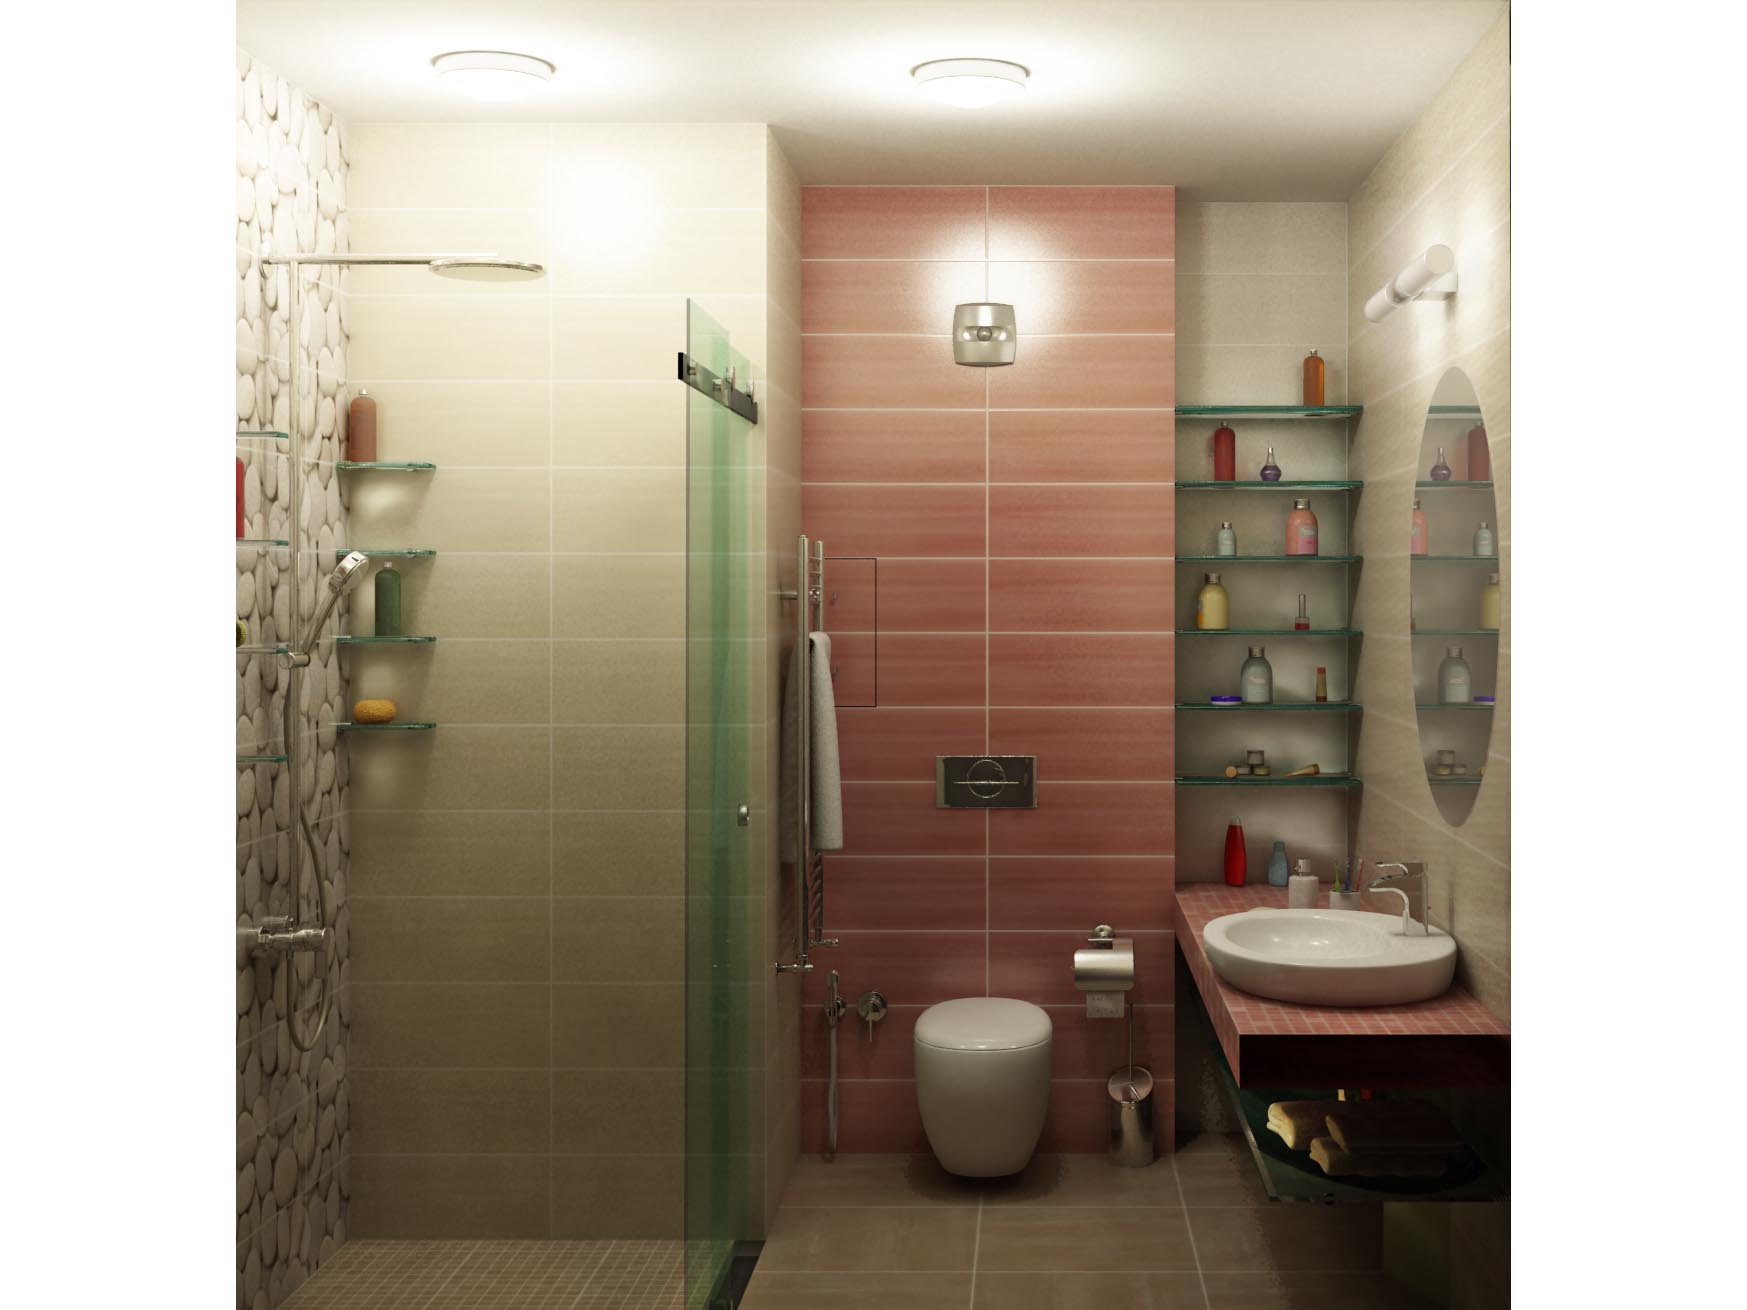 Bathroom – in red